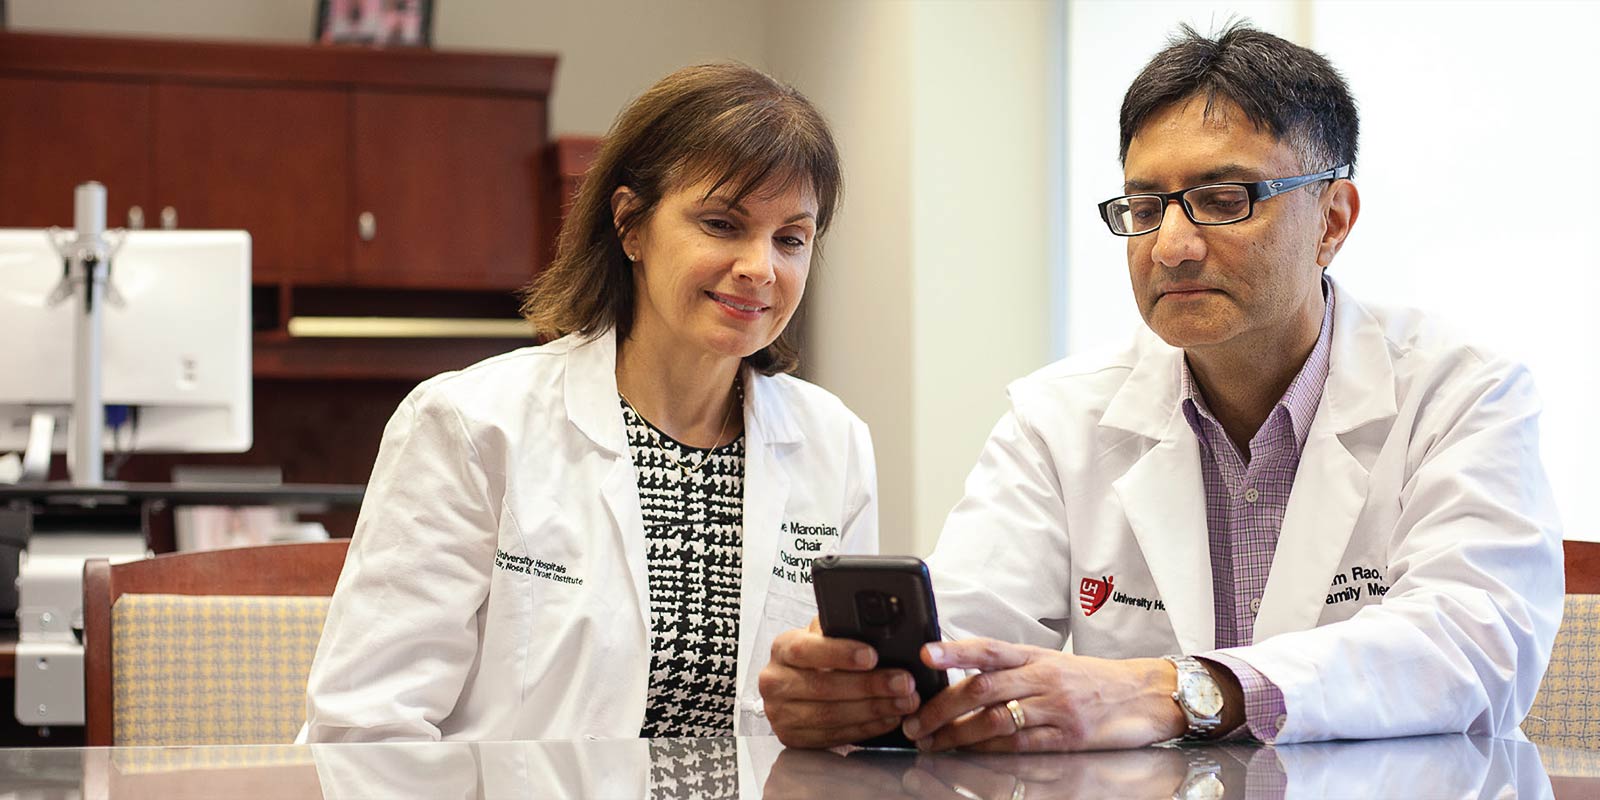 Through improved clinician communication, UH smartphone apps can enhance quality patient care